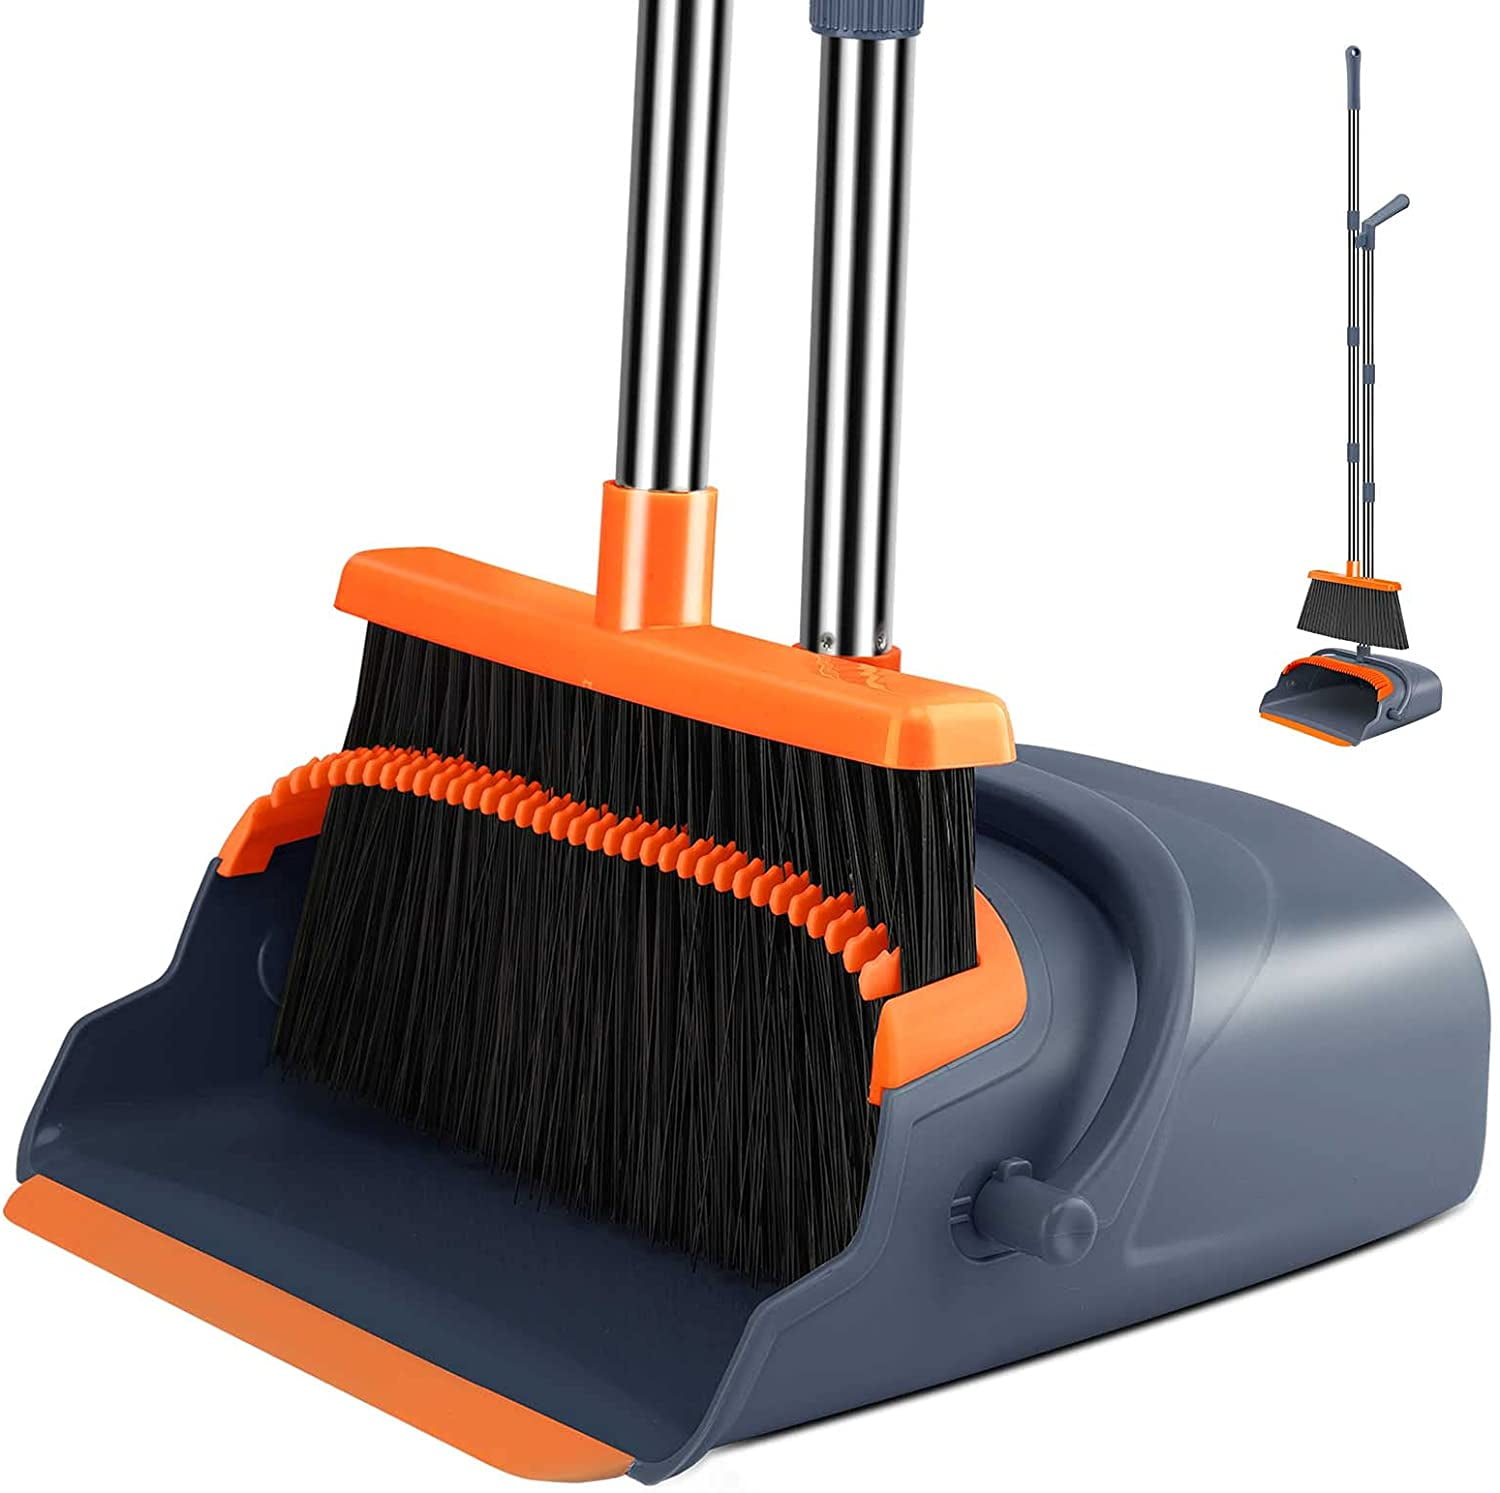 Broom and Dustpan with Long Handle for Outdoor Indoor Home Cleaning and Sweeping Long Handled Dustpan Brush Set